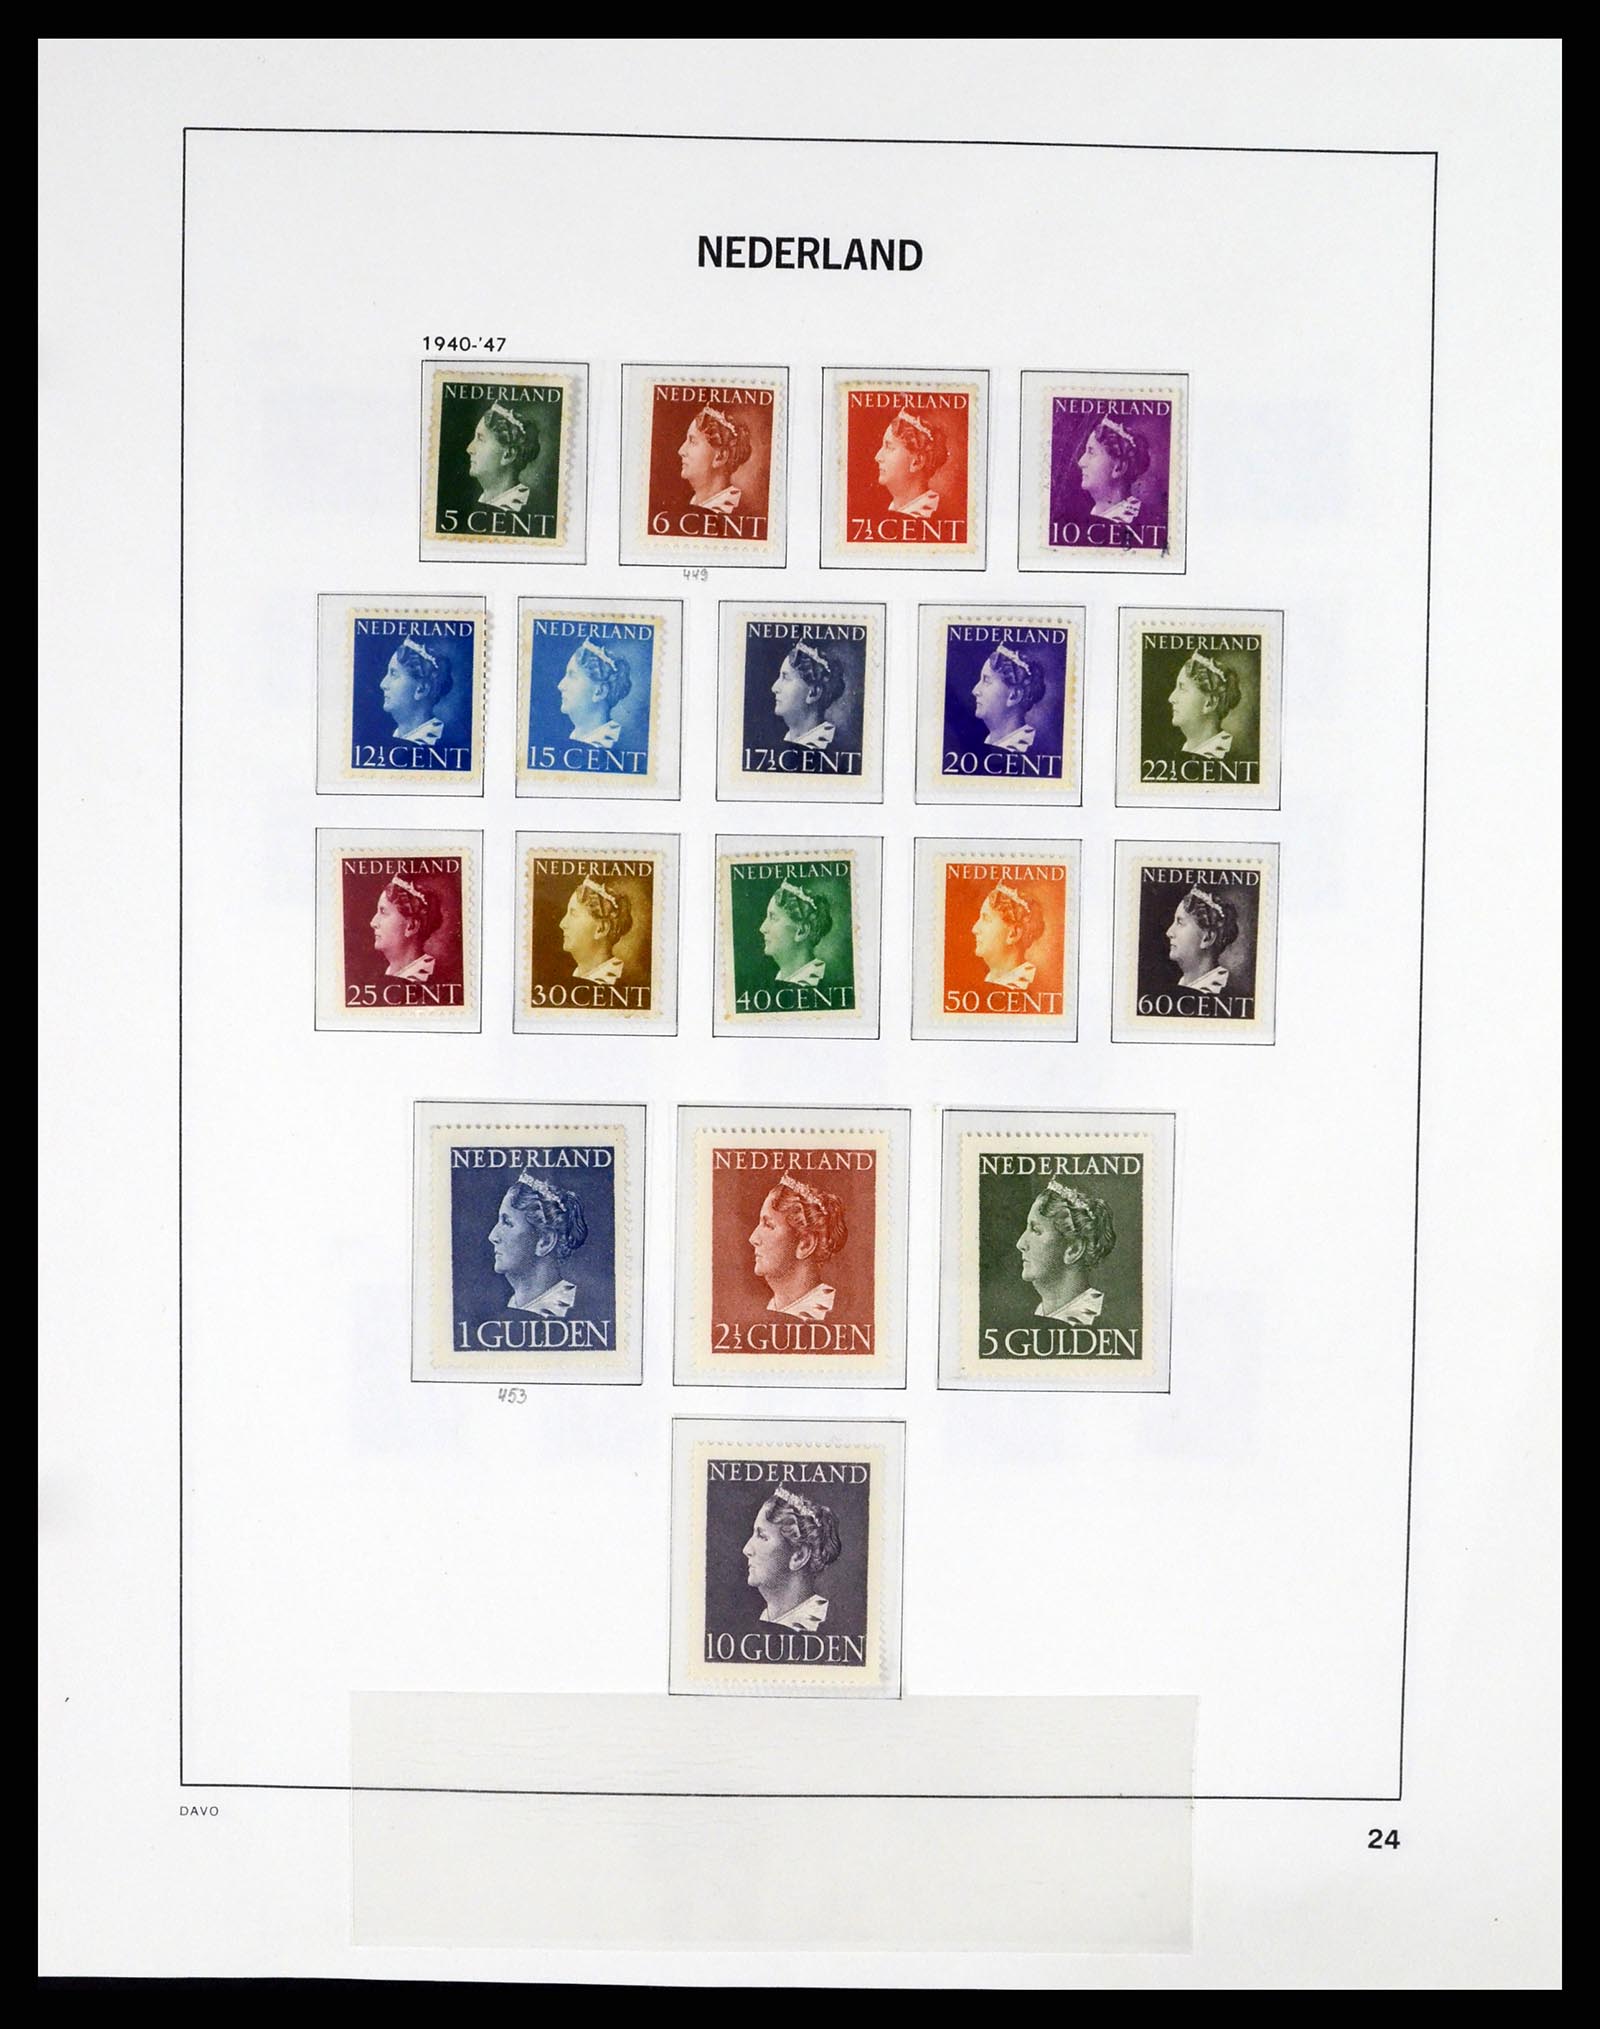 37294 024 - Stamp collection 37294 Netherlands 1852-2001.